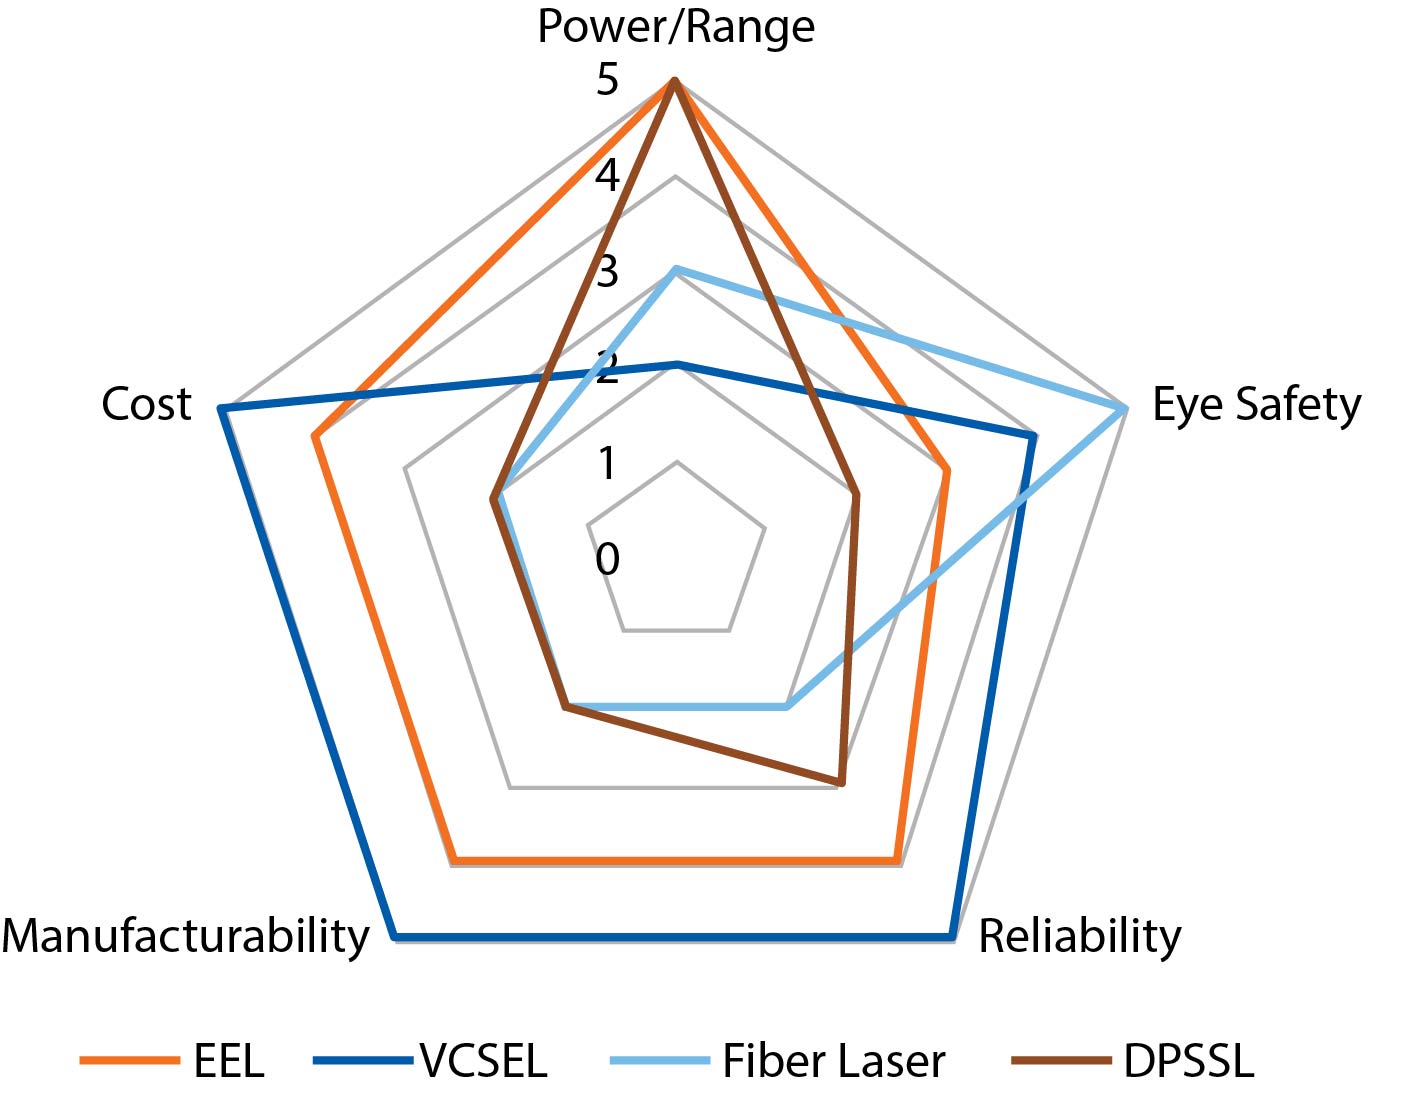 Automotive lidar systems typically leverage one of four laser types: edge-emitting lasers (EELs), vertical-cavity surface-emitting lasers (VCSELs), diode-pumped solid-state lasers (DPSSLs), and pulsed fiber lasers. Each has merits and drawbacks (above), and each has been adopted by lidar developers to varying degrees (left). Based on statistics compiled by Focuslight in a survey of over 50 lidar developers. Courtesy of Focuslight Technologies.